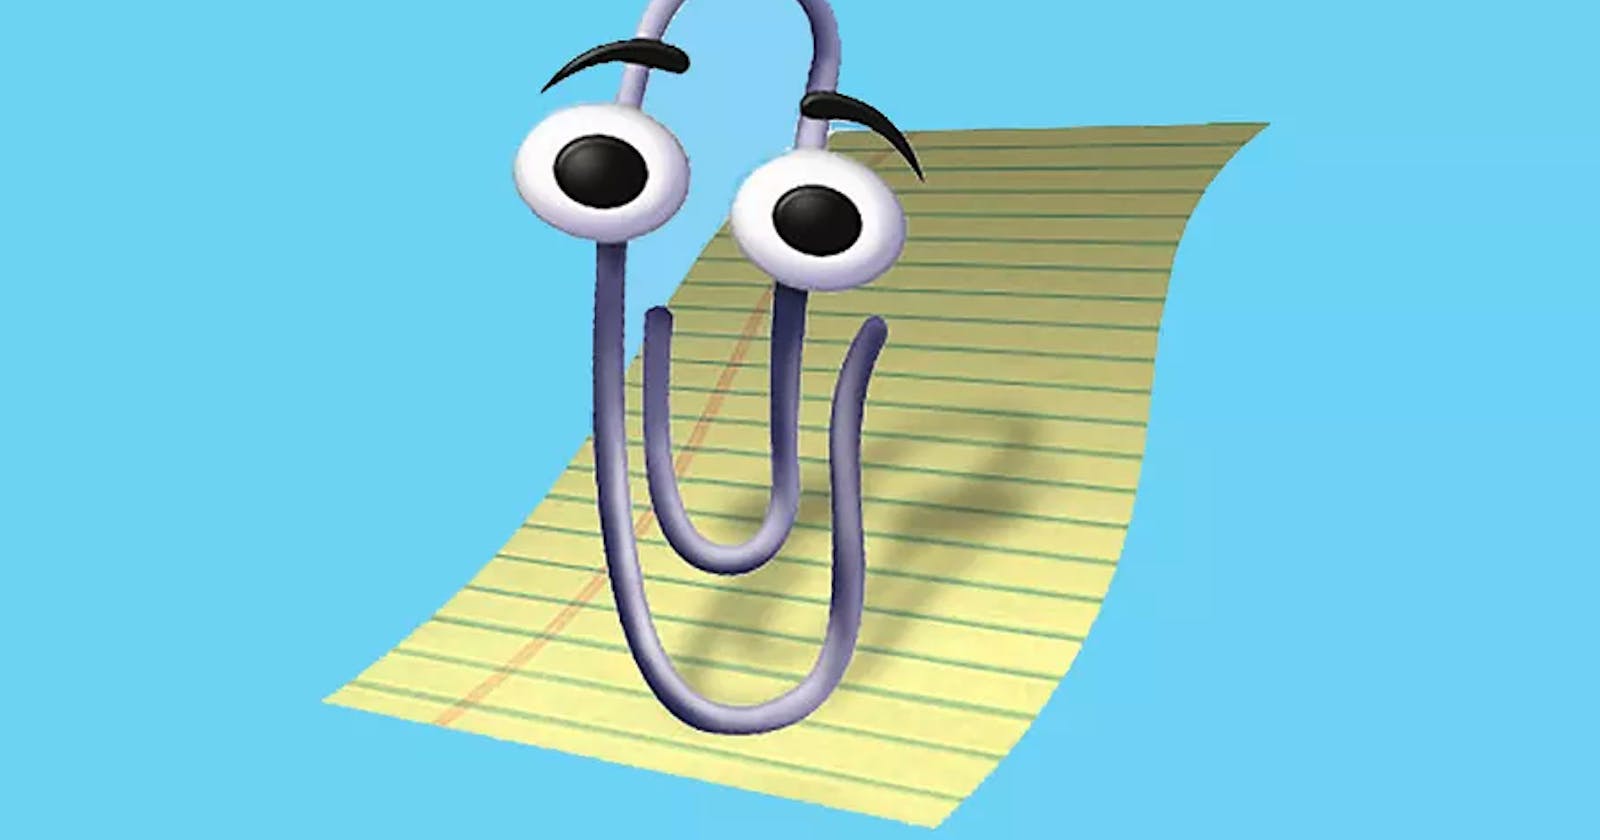 Mr. Clippy - The Take 2 of Human-AI Interaction